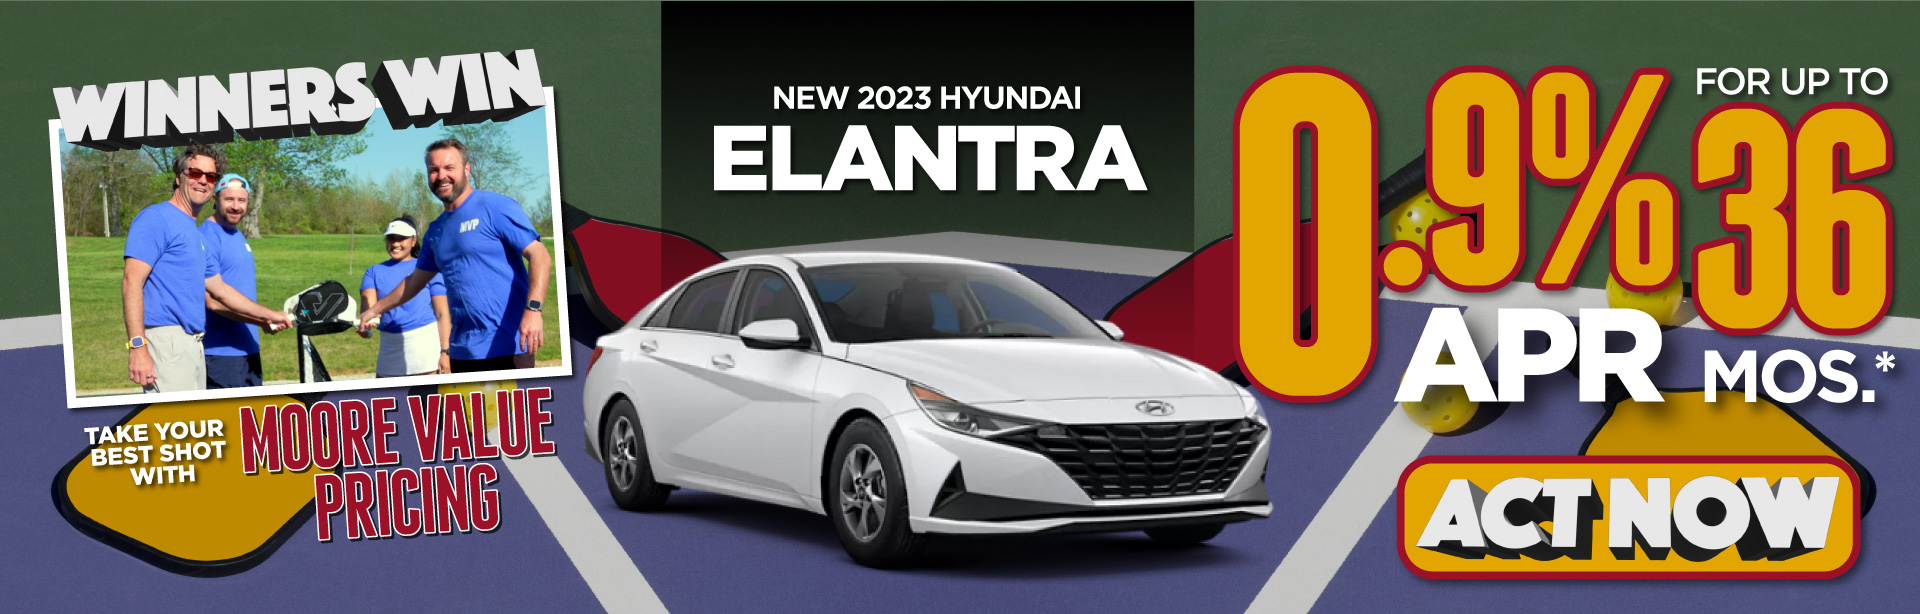 New 2023 Hyundai Elantra 0.9% APR a month for up to 36 months* | Act Now